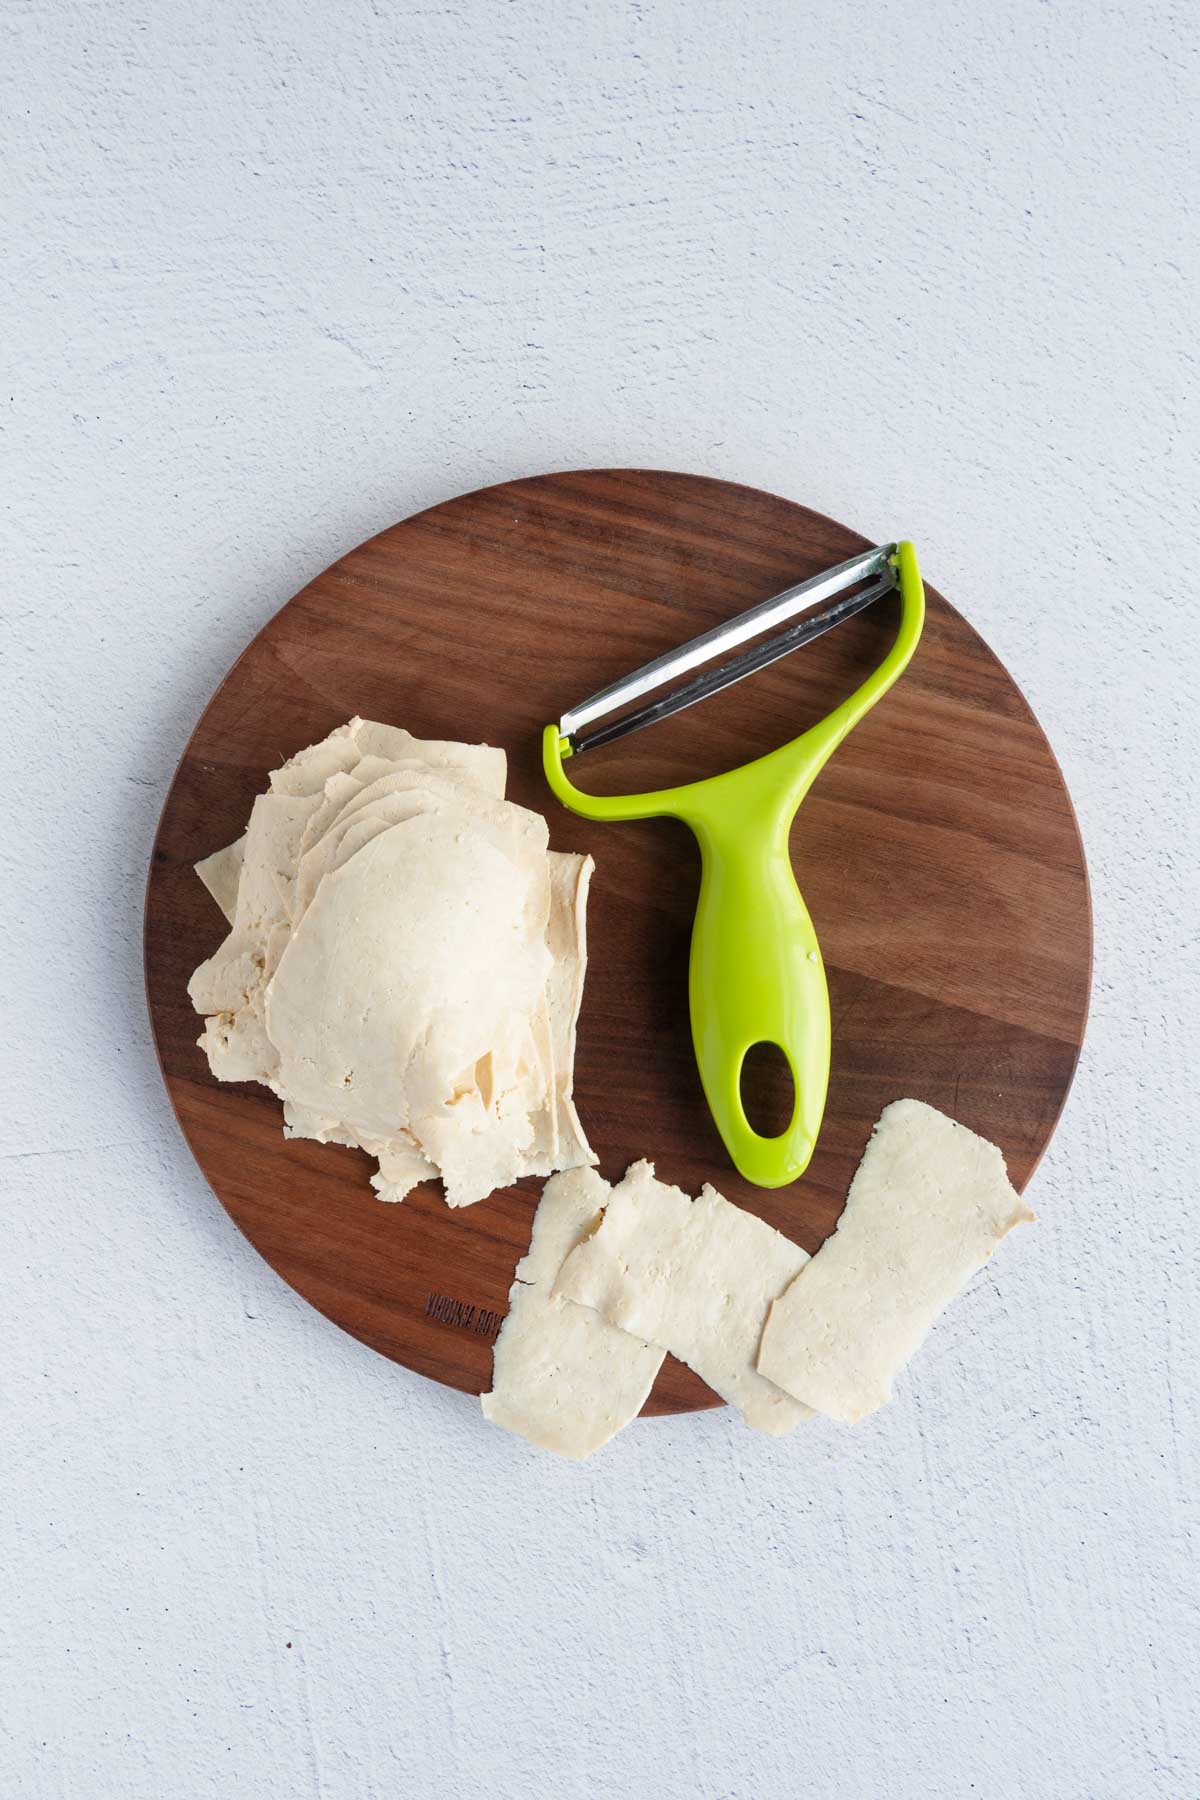 Grated tofu and a wide vegetable peeler on a round wooden cutting board.